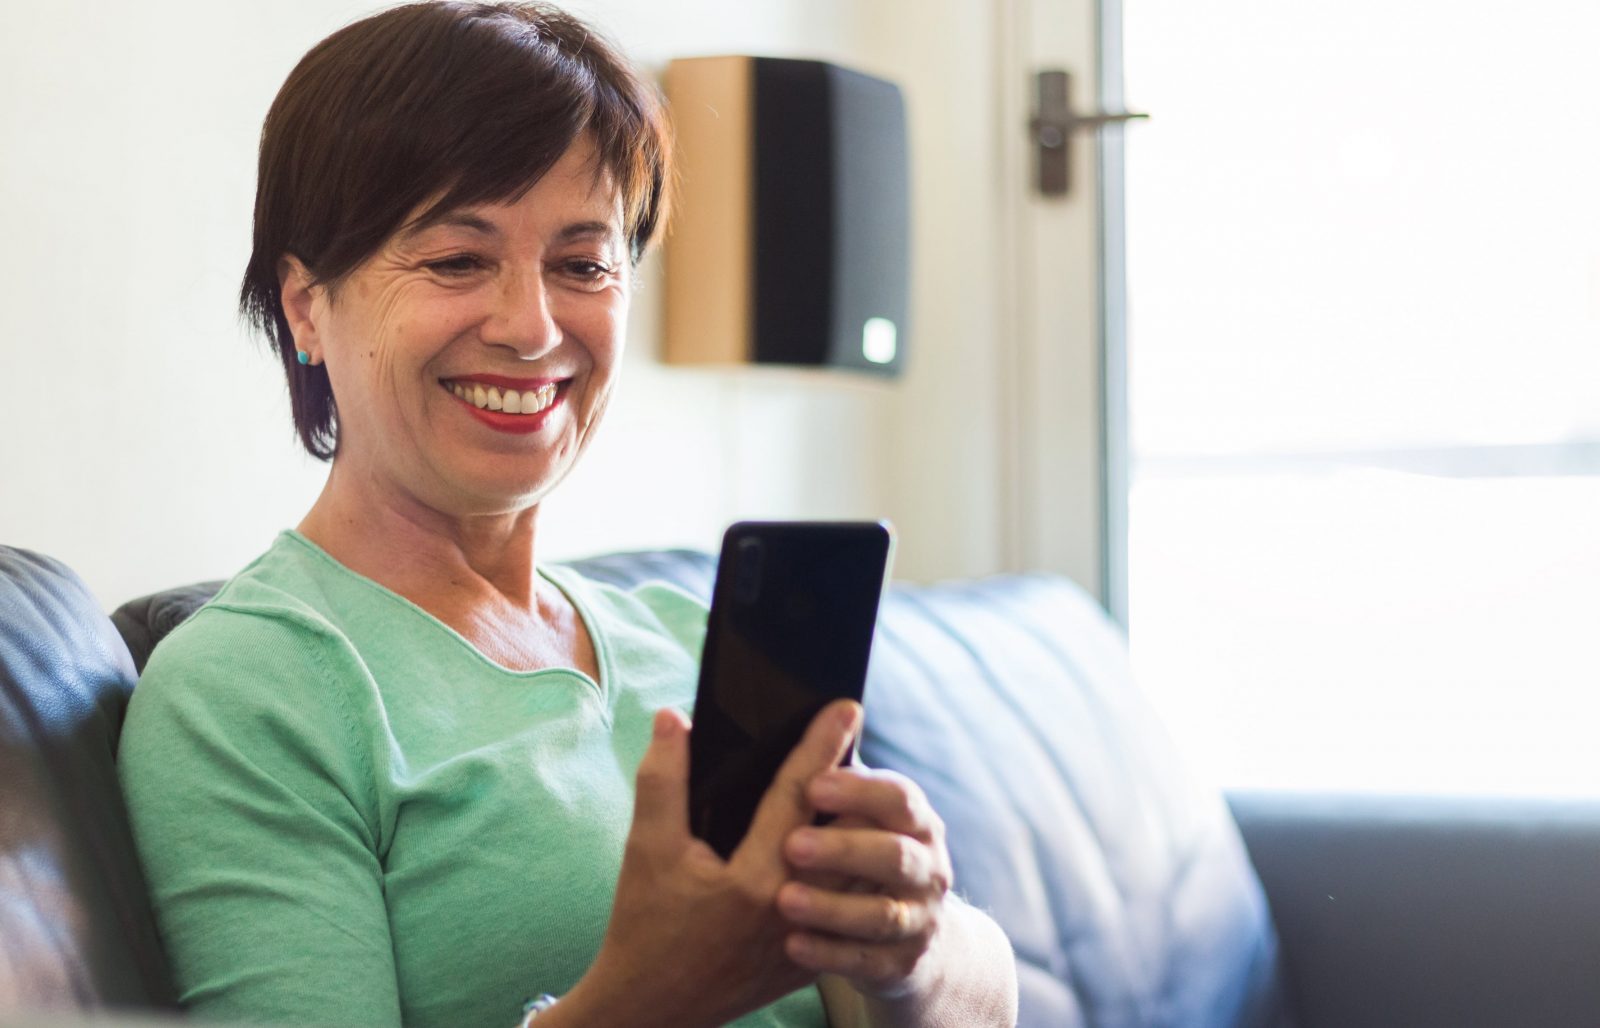 Smiling woman looking at her phone on a couch